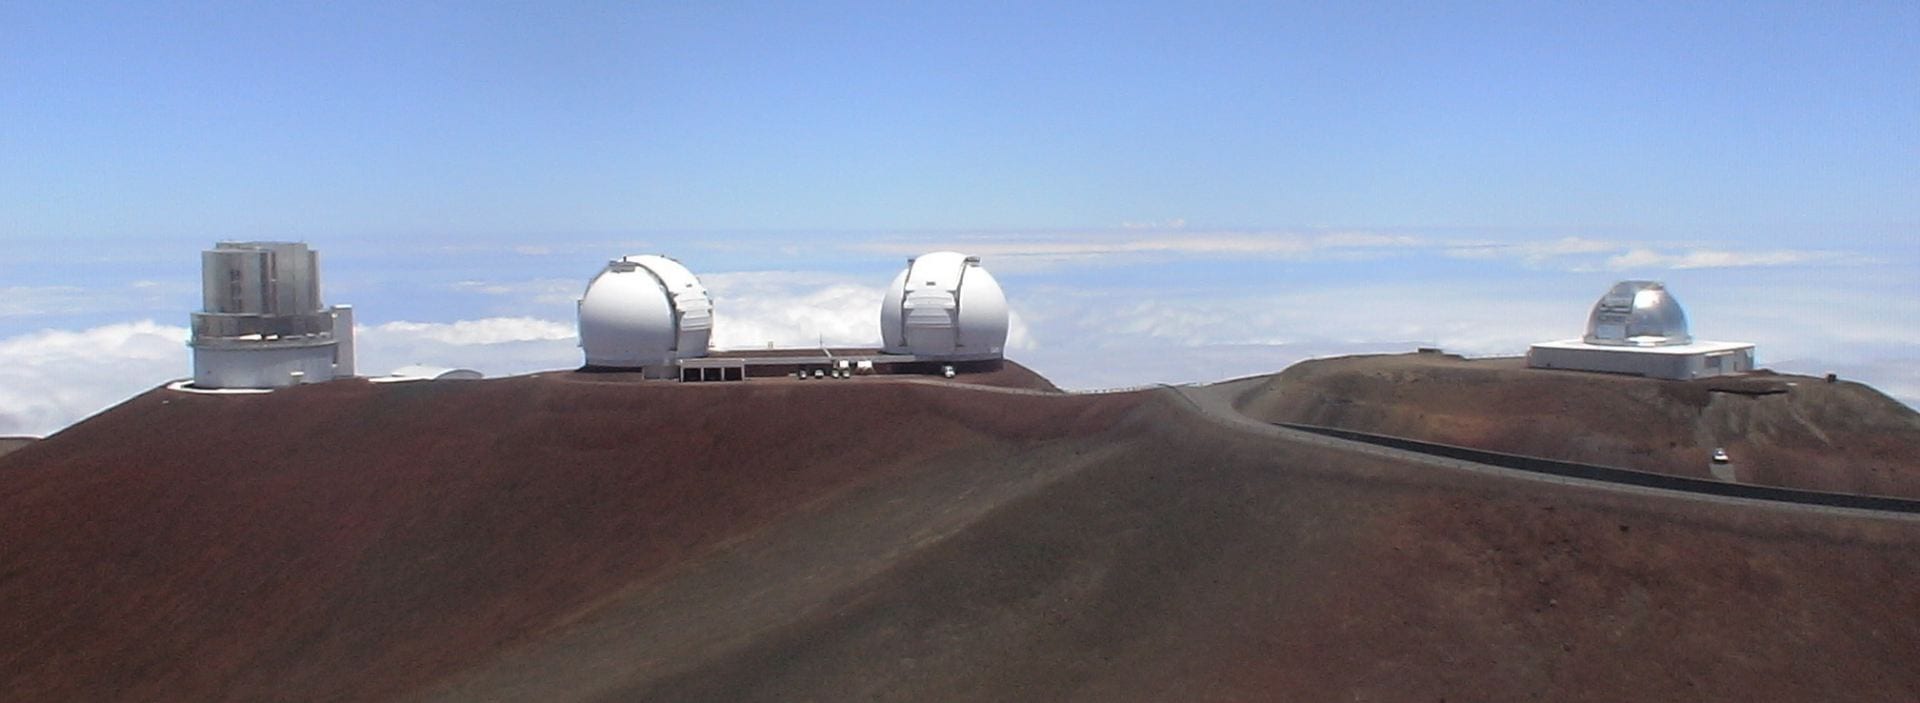 The domes of four telescopes on top of a mountain with the clouds visible below them.